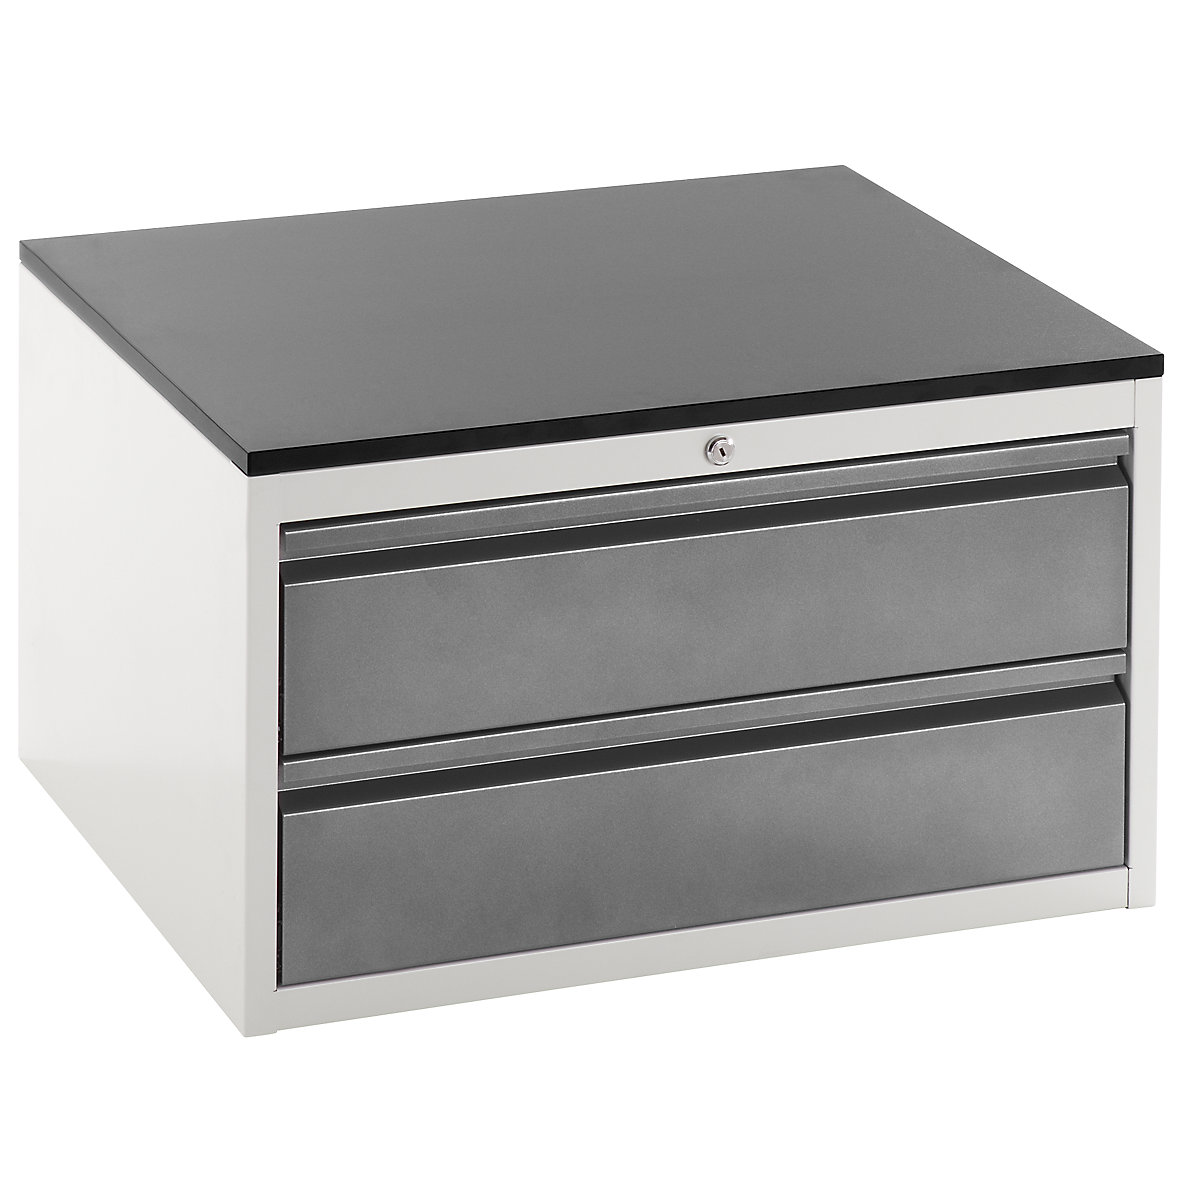 Drawer cupboard with telescopic guides – RAU, height 460 mm, 2 x 180 mm drawers, light grey / charcoal, width 770 mm-13